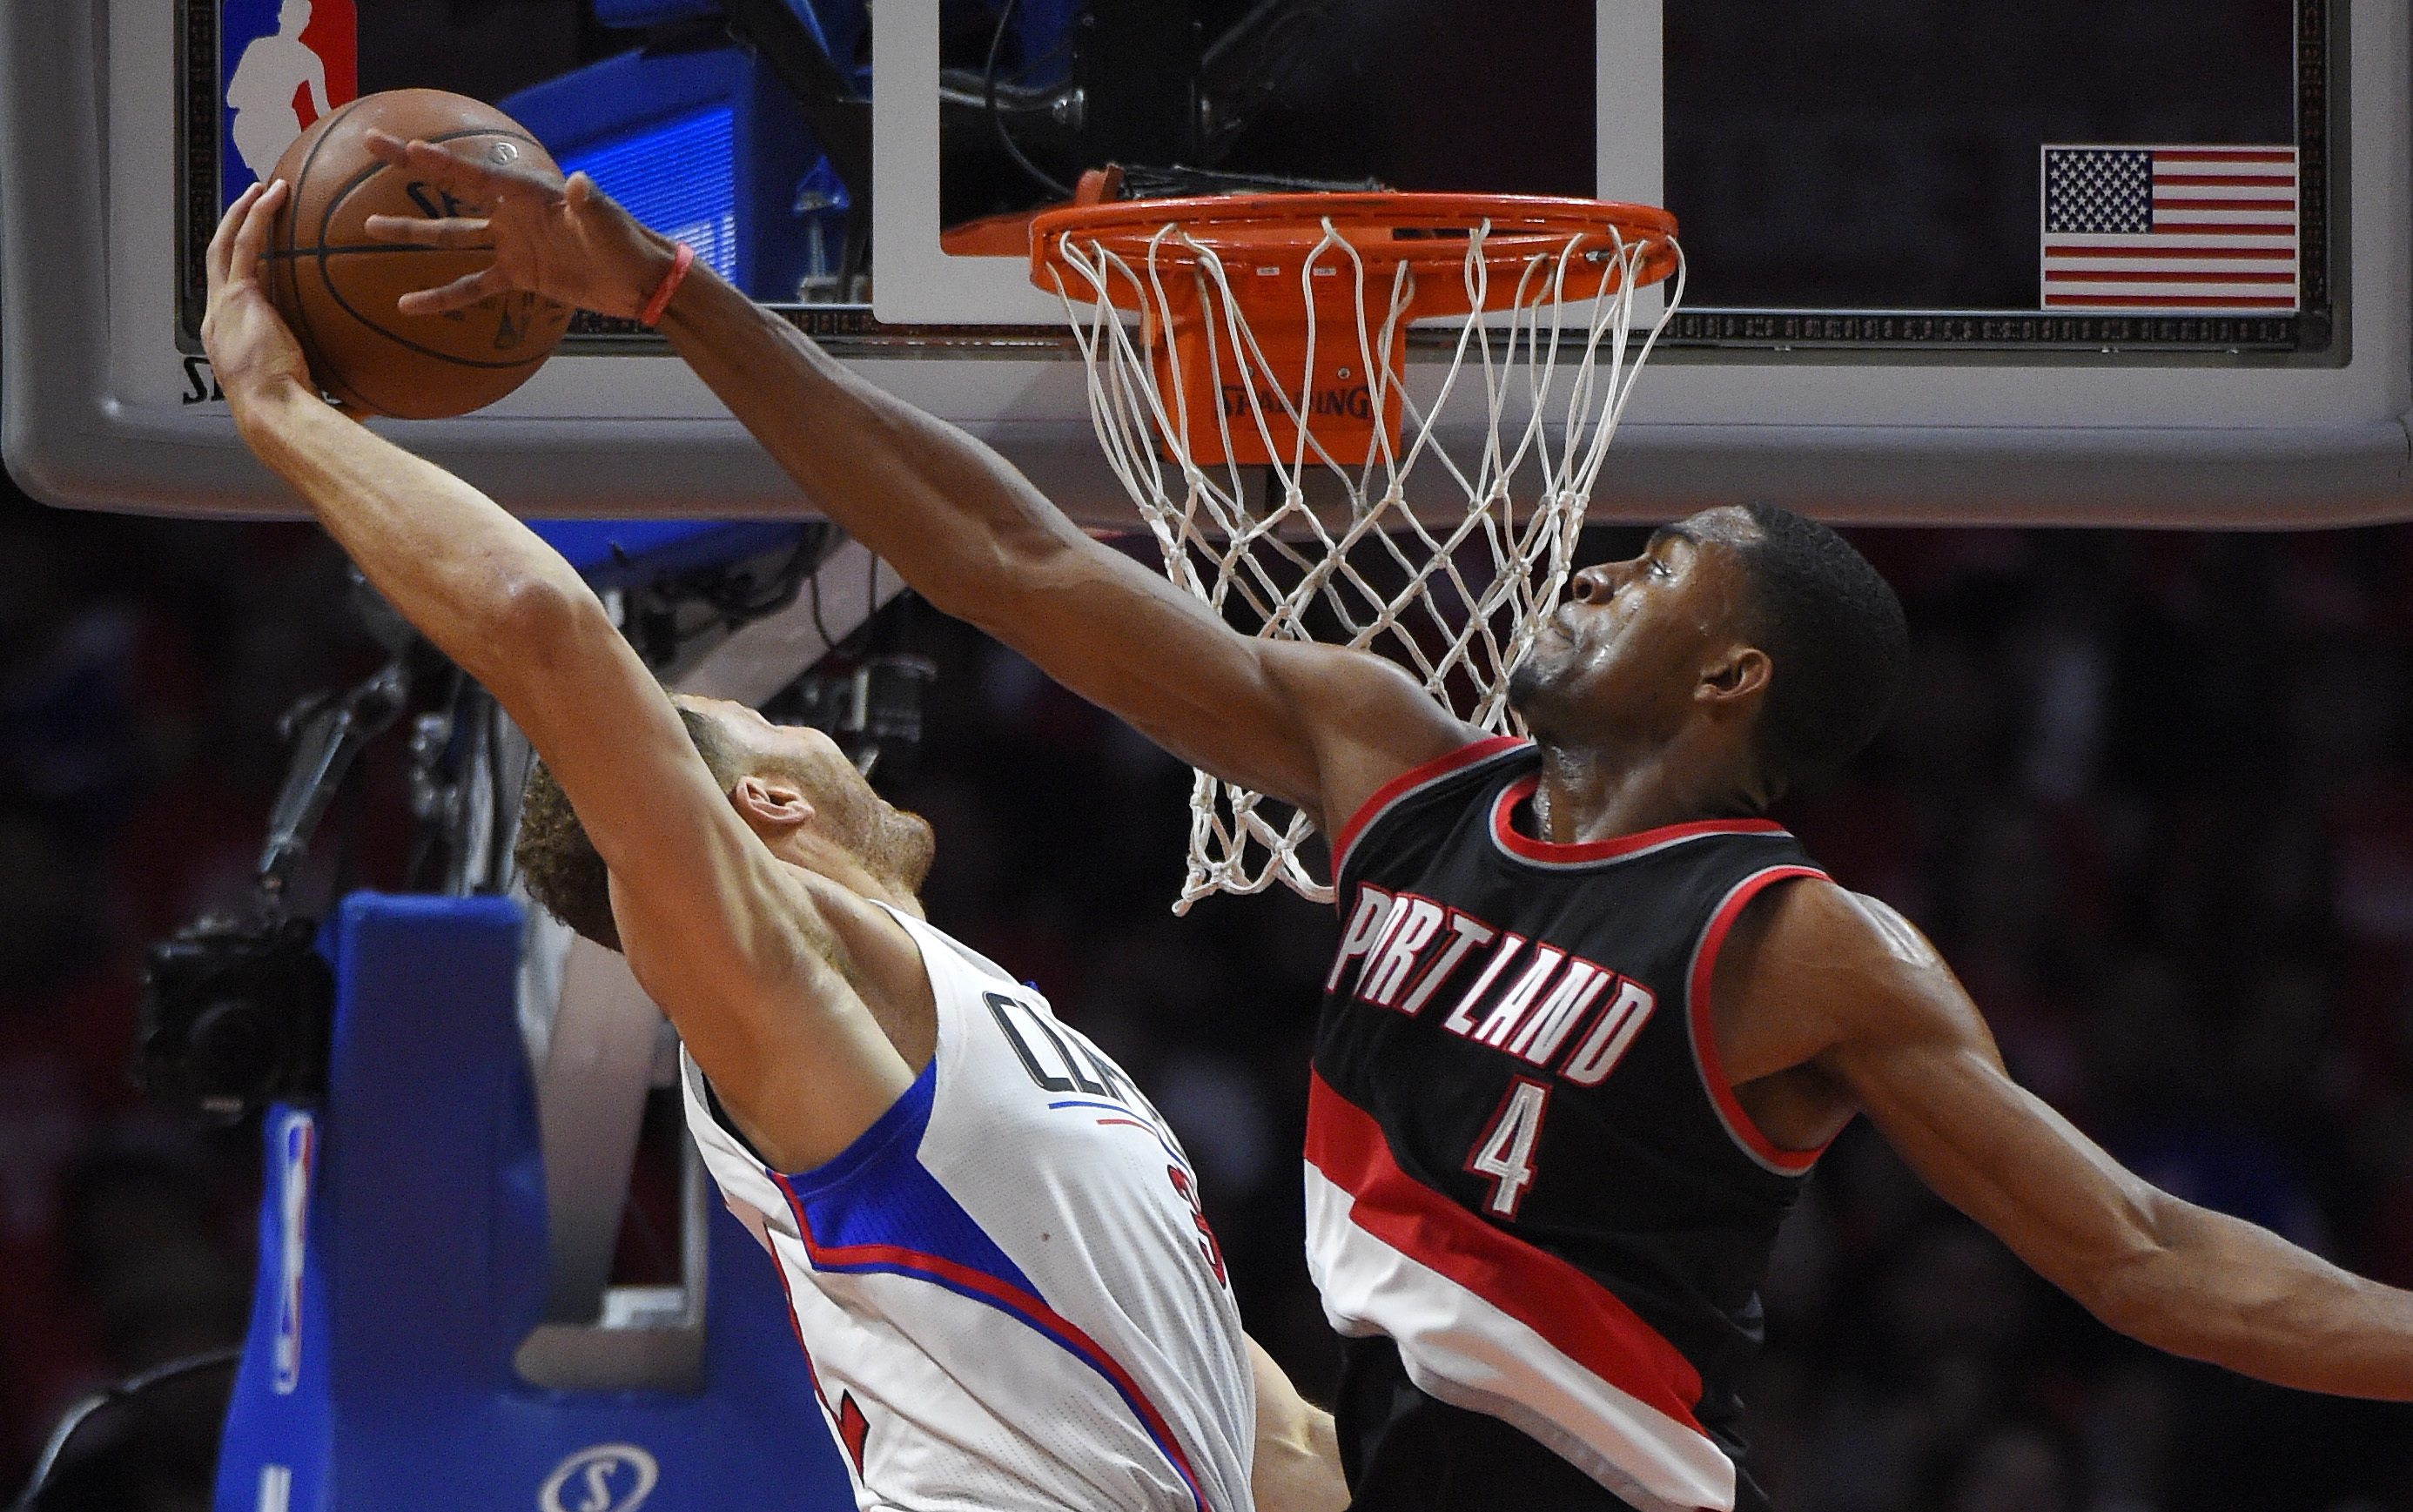 Los Angeles Clippers forward Blake Griffin, left, goes up for a dunk as Portland Trail Blazers forward Maurice Harkless defends during the second half in Game 2 of a first-round NBA basketball playoff series, Wednesday, April 20, 2016, in Los Angeles. The Clippers won 102-81. (AP Photo/Mark J.